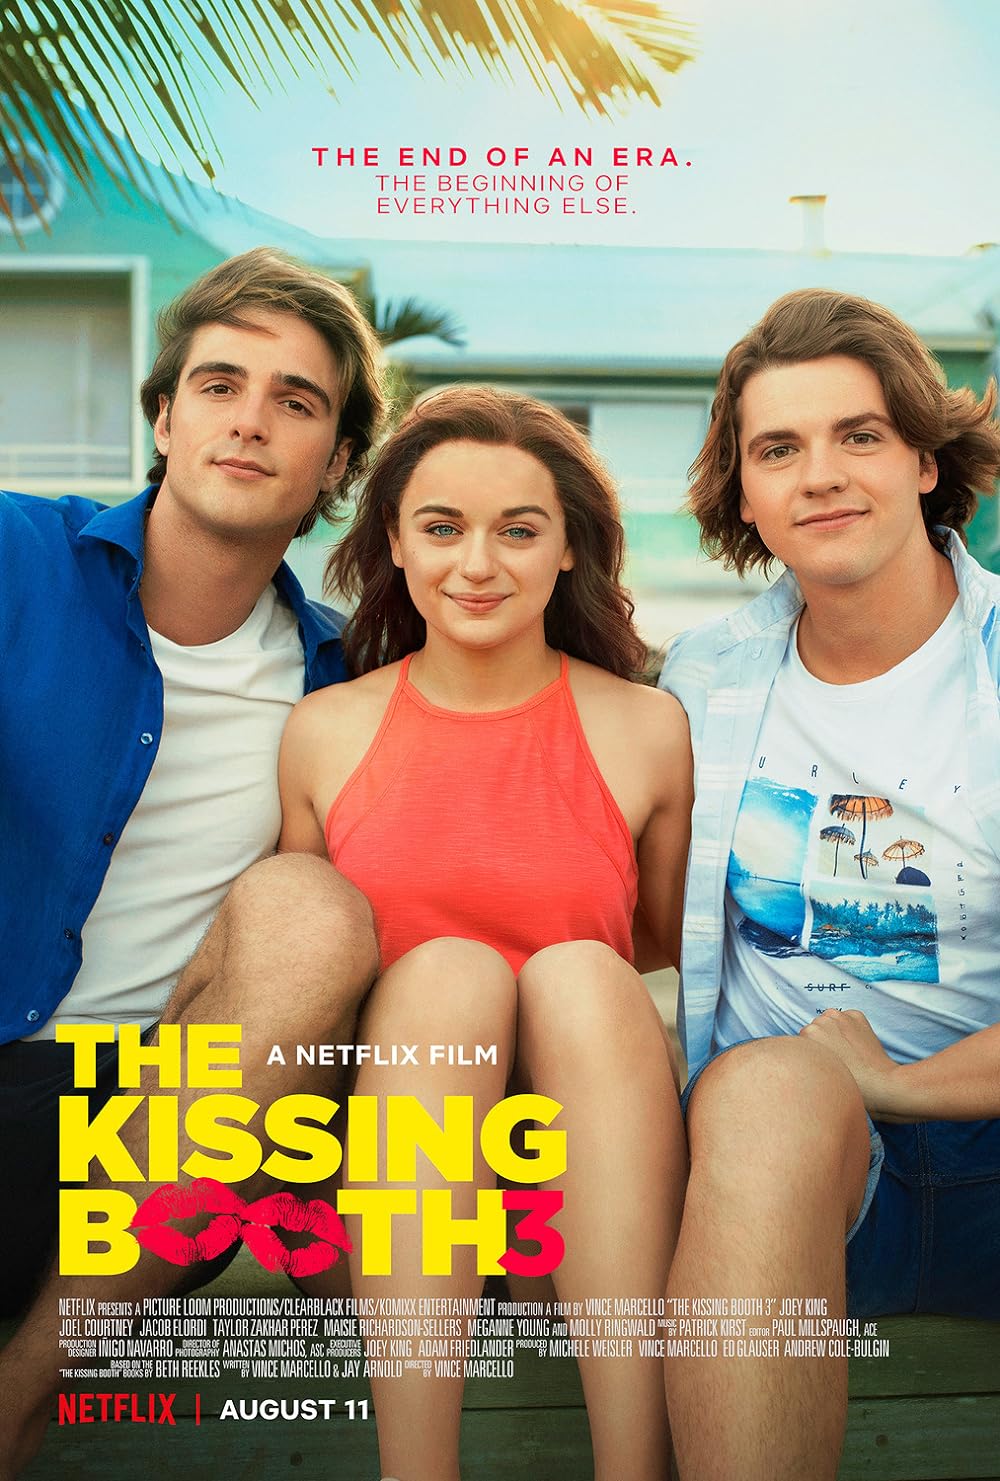 The Kissing Booth 3 (2021) 640Kbps 24Fps 48Khz 5.1Ch DD+ NF E-AC3 Turkish Audio TAC